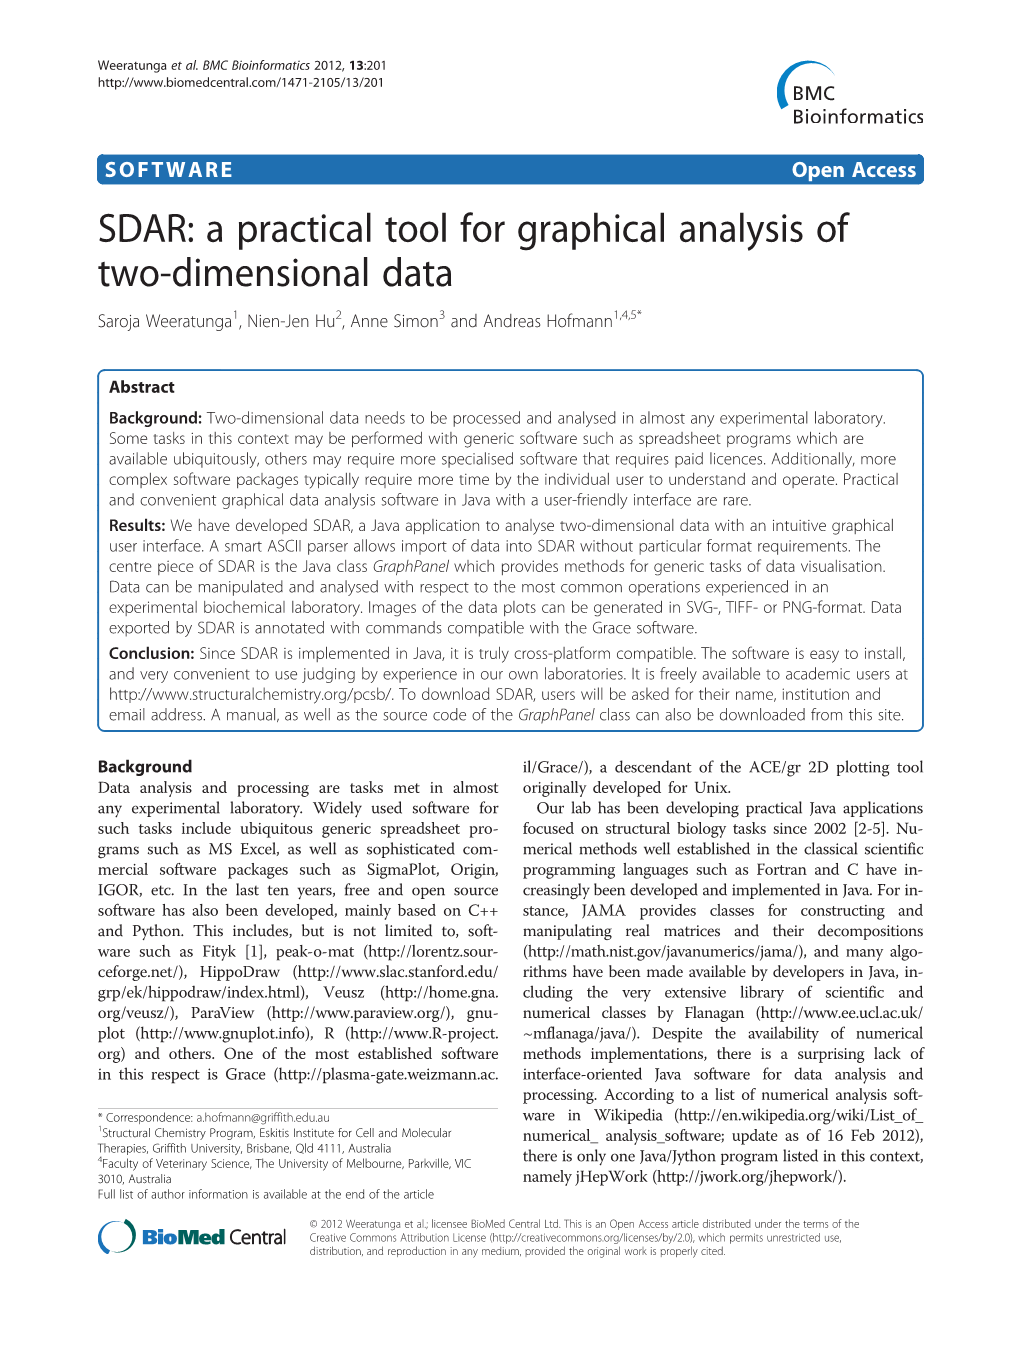 A Practical Tool for Graphical Analysis of Two-Dimensional Data Saroja Weeratunga1, Nien-Jen Hu2, Anne Simon3 and Andreas Hofmann1,4,5*